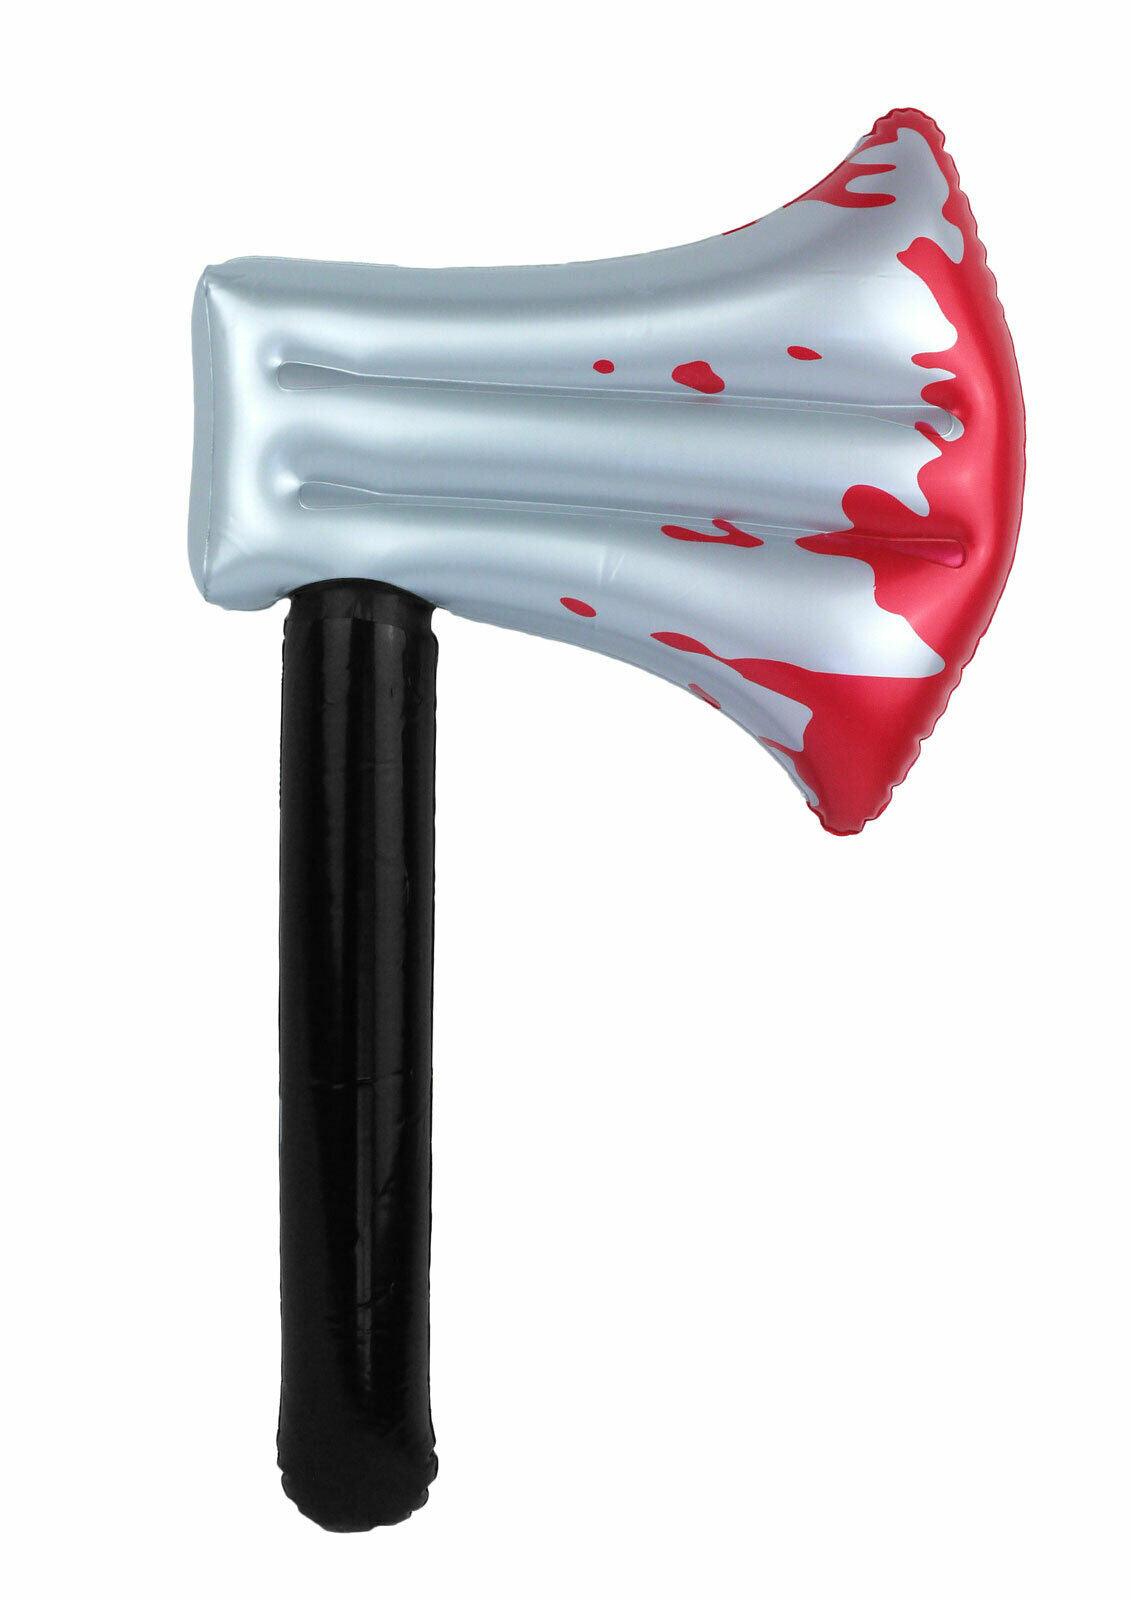 Inflatable Bloody Axe 40 Cm Blow Up Spooky Toy Halloween Party Decoration Prop - Labreeze